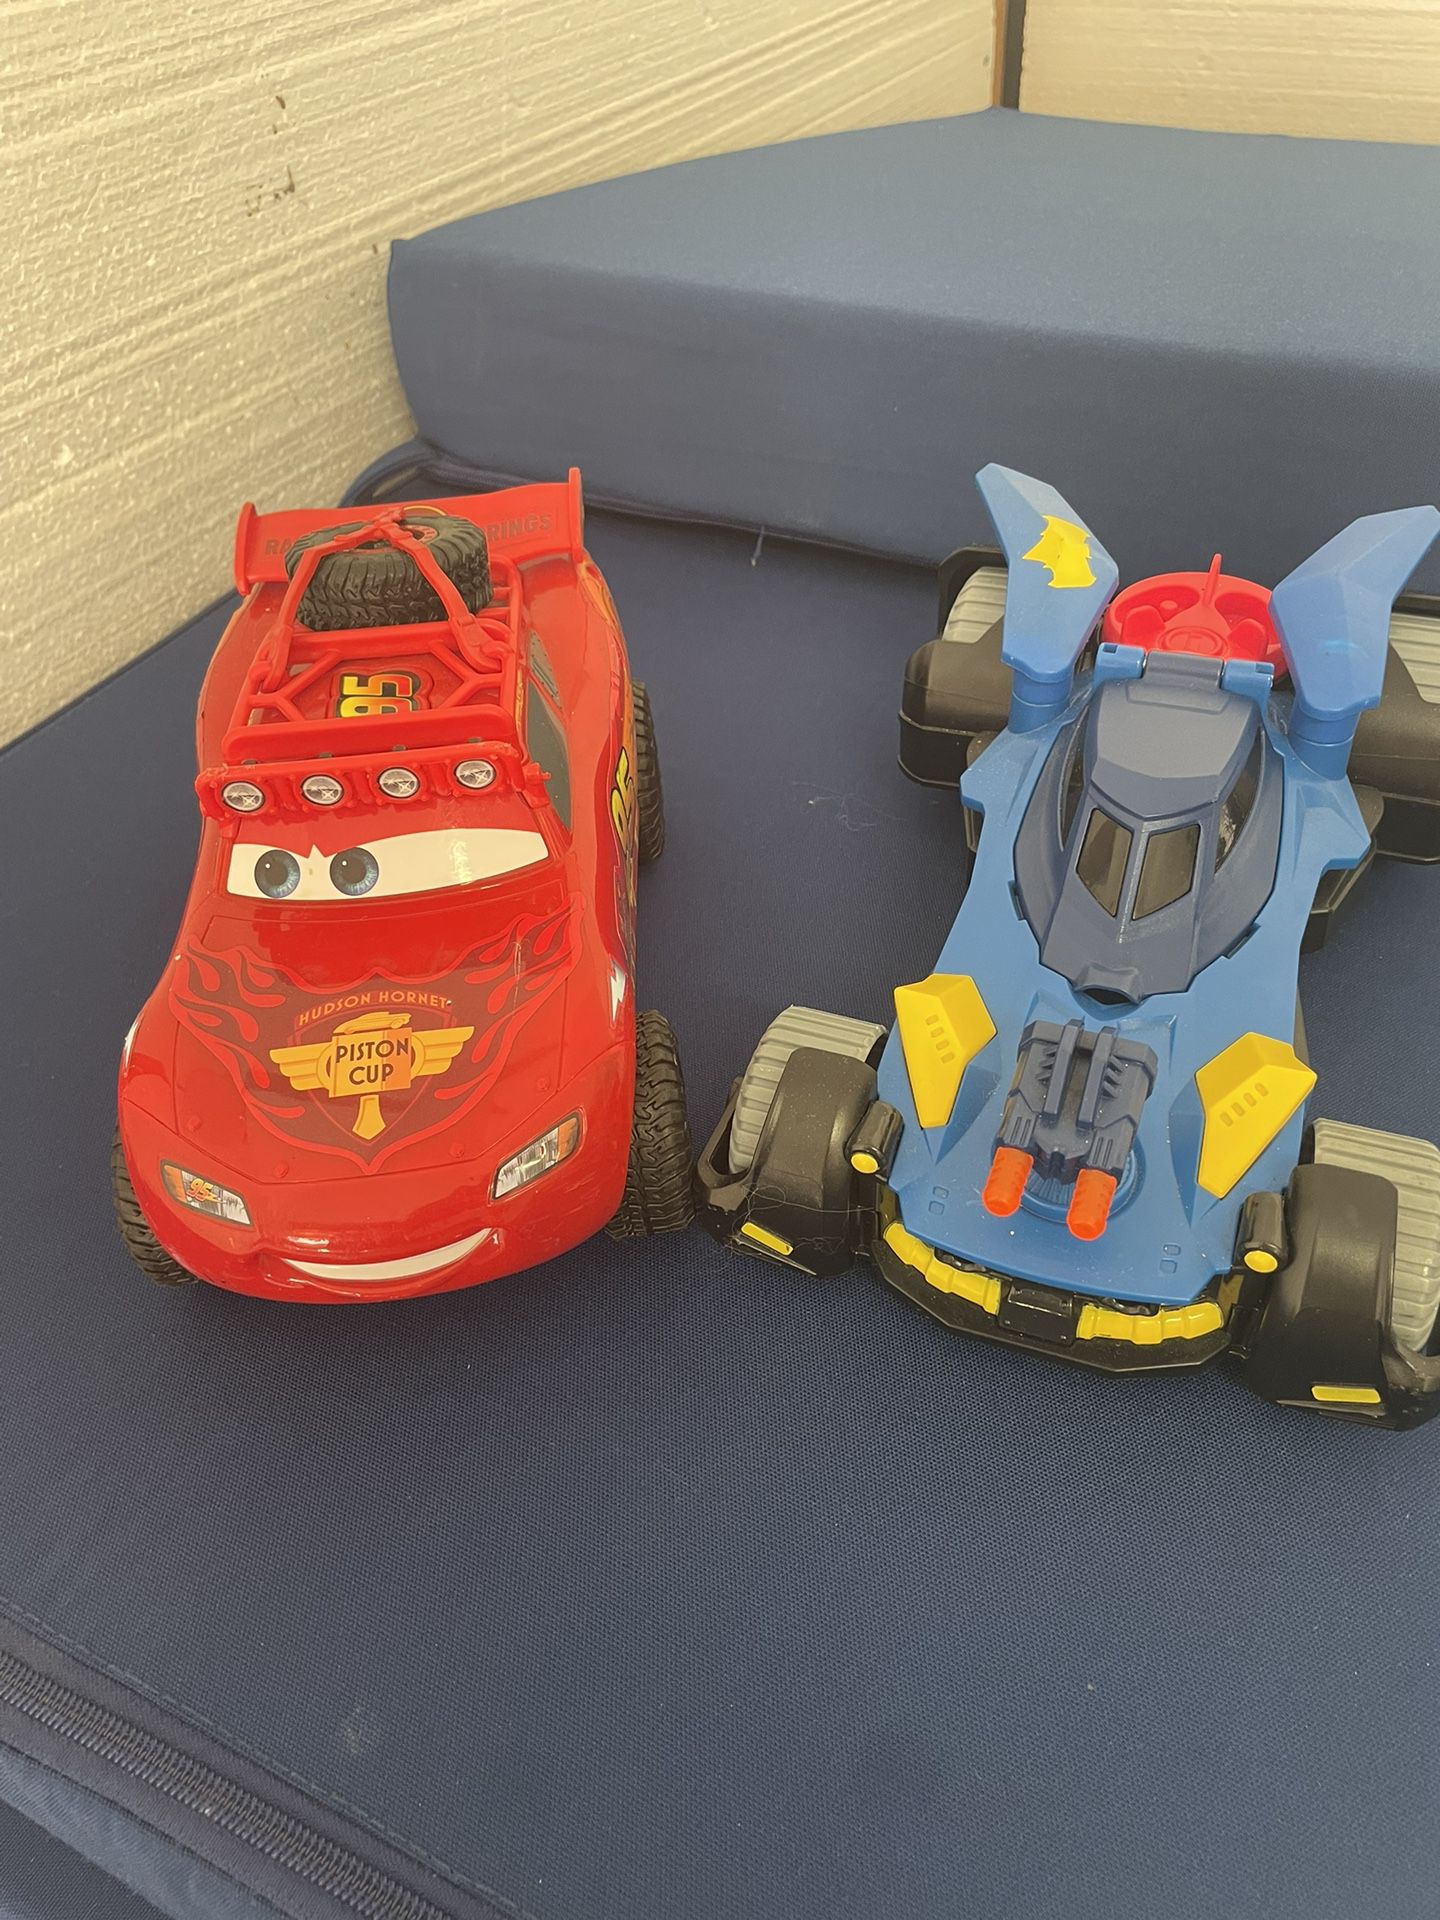 Batman and Lightning McQueen Toy Cars